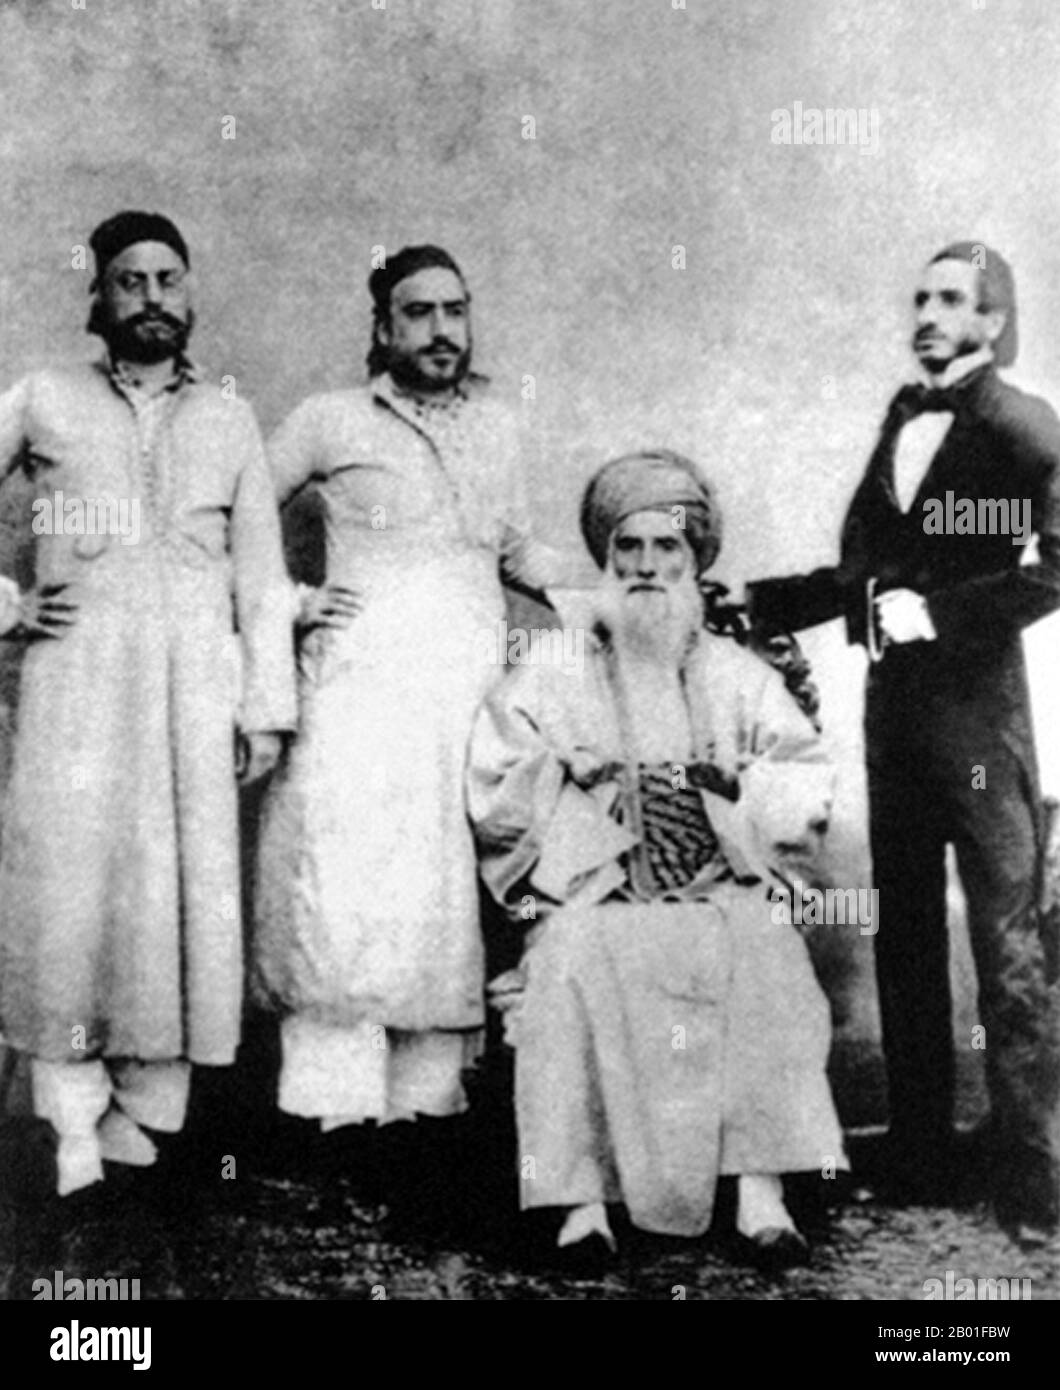 India/Iraq: David Sassoon (October 1792 – November 7, 1864) with his sons Elias David, Albert Abdallah & Sassoon David, c. 1850.  Sassoon was born in Baghdad, where his father, Saleh Sassoon, was a wealthy businessman and chief treasurer to the pashas (the governors of Baghdad) from 1781 to 1817, and leader of the city's Jewish community.  The family were Sephardim whose ancestors once lived in Spain. His mother was Amam Gabbai. Following increasing persecution of Baghdad's Jews by Daud Pasha, the family moved to Bombay via Persia. Sassoon was in business in Bombay no later than 1832. Stock Photo